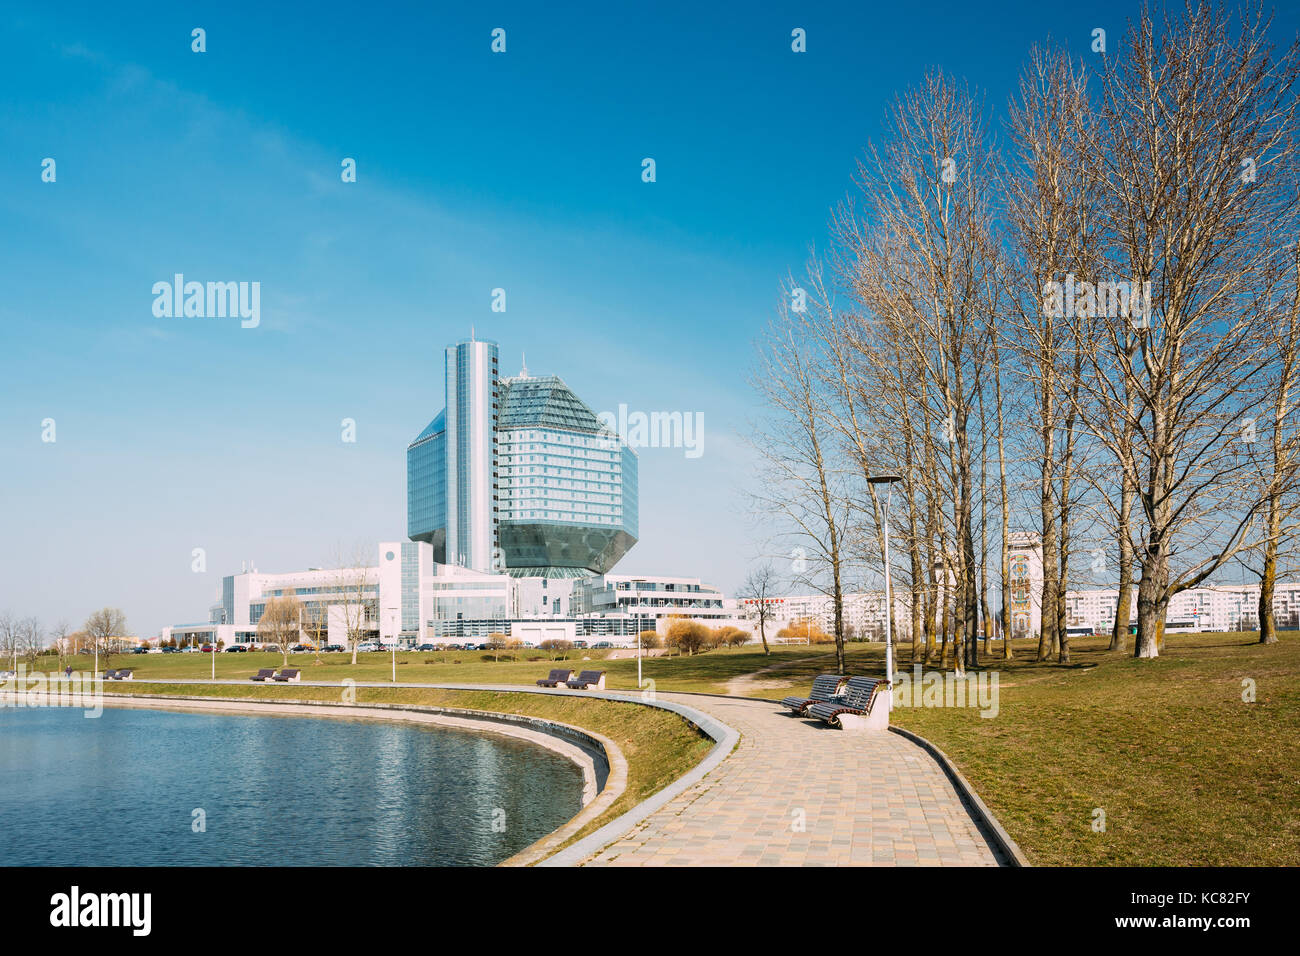 Minsk, Belarus. Building Of National Library Of Belarus In Minsk. Famous Symbol Of Modern Belarusian Culture And Science. Modern Architecture Stock Photo